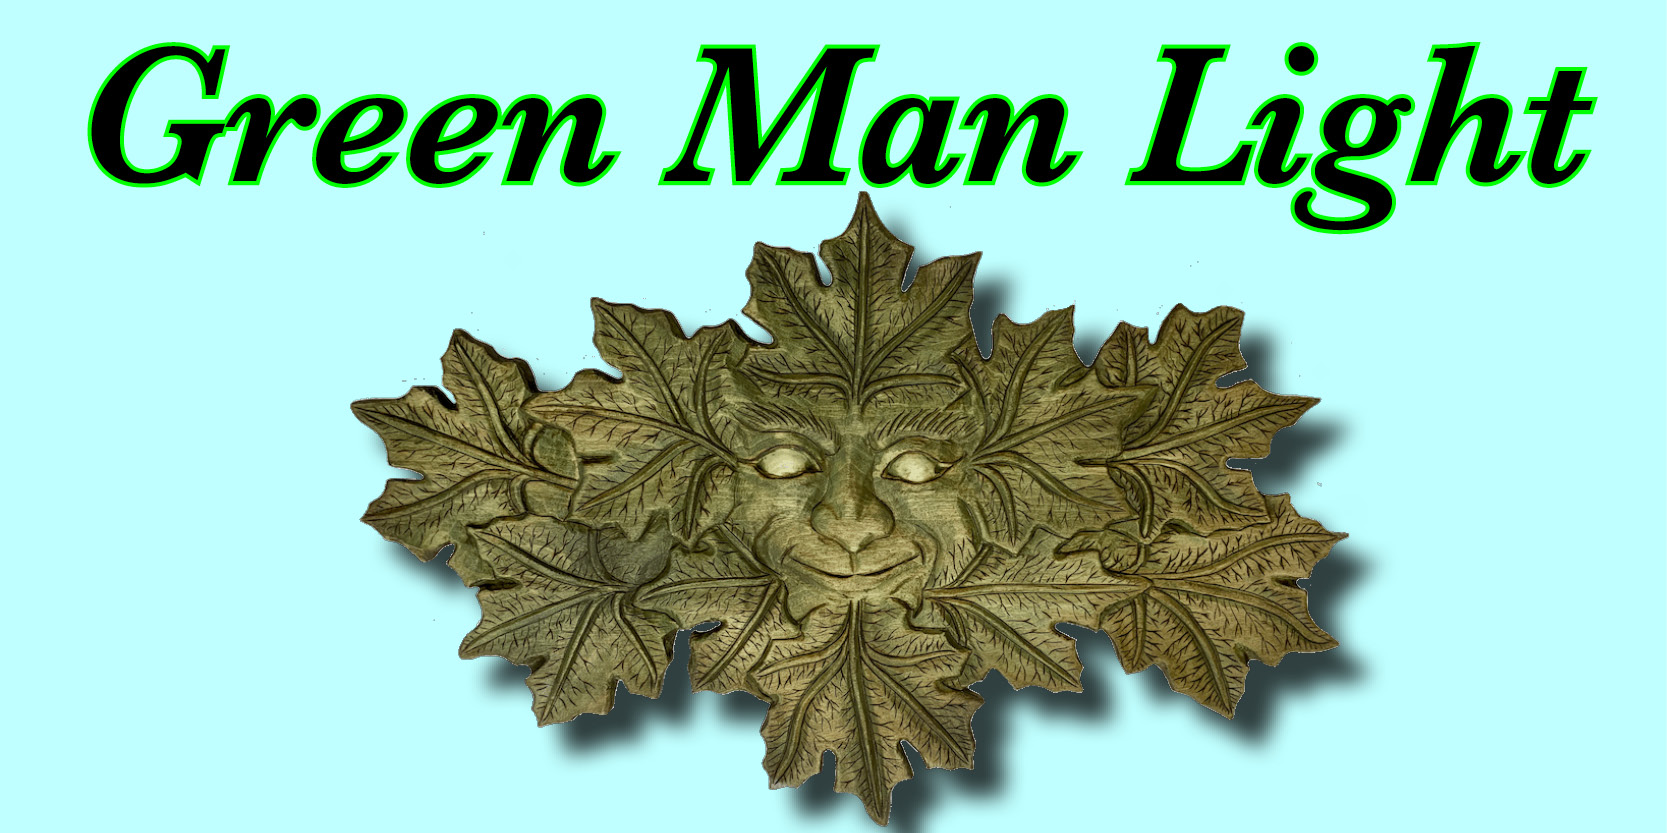 Green Man Wall Art LED Light woodcarving and wall art one of a kind 